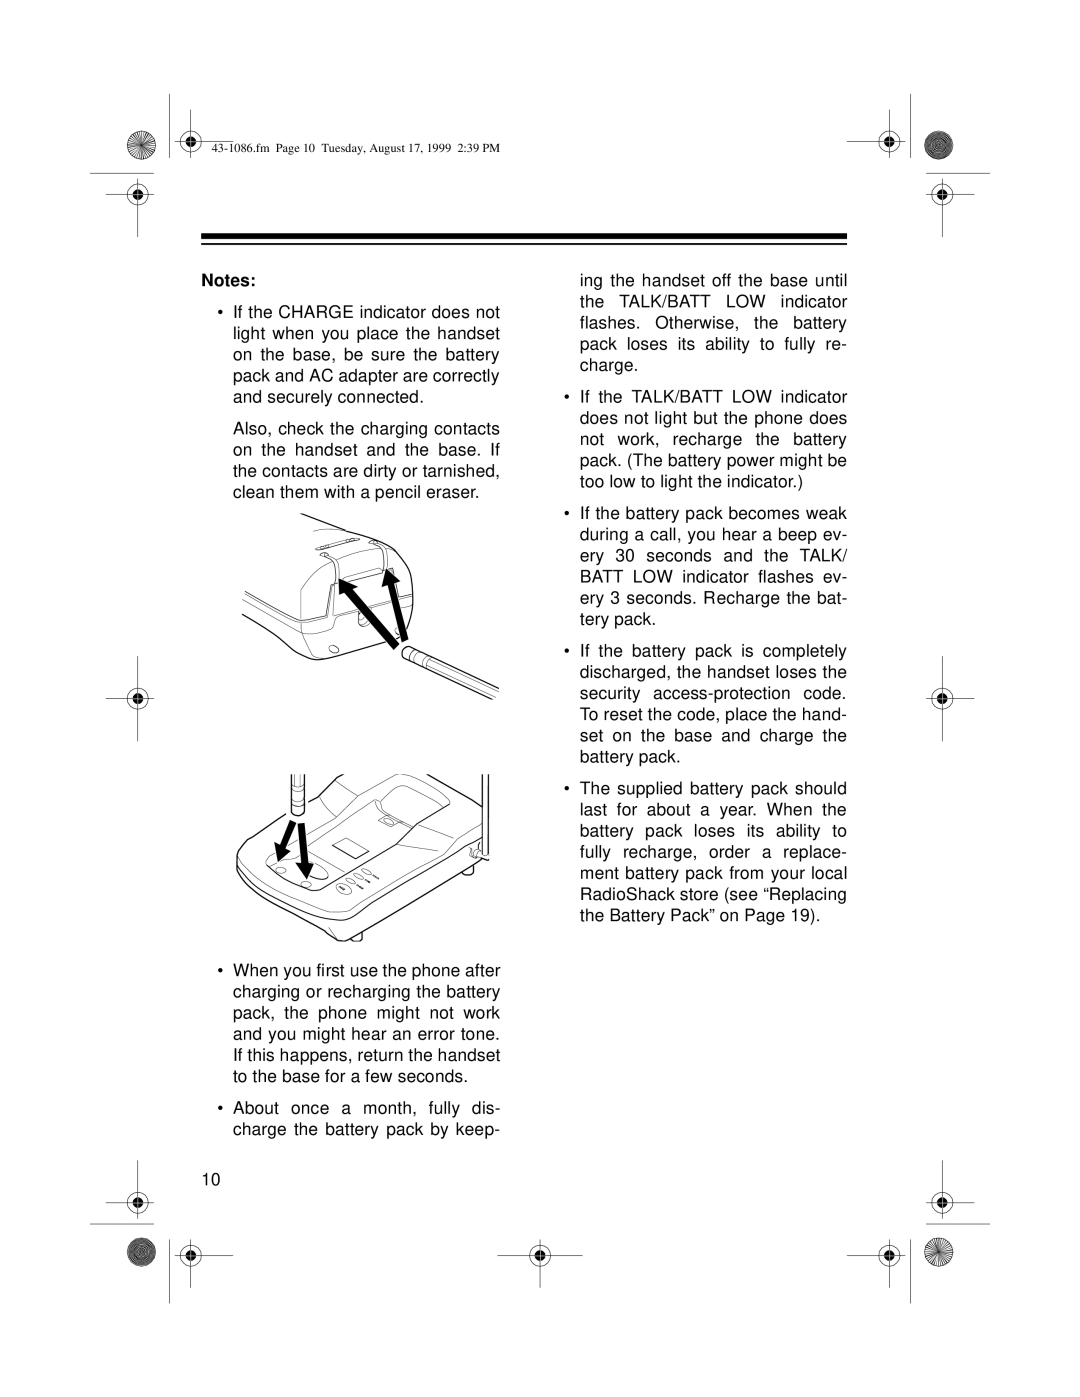 Radio Shack ET-916 owner manual About once a month, fully dis- charge the battery pack by keep 